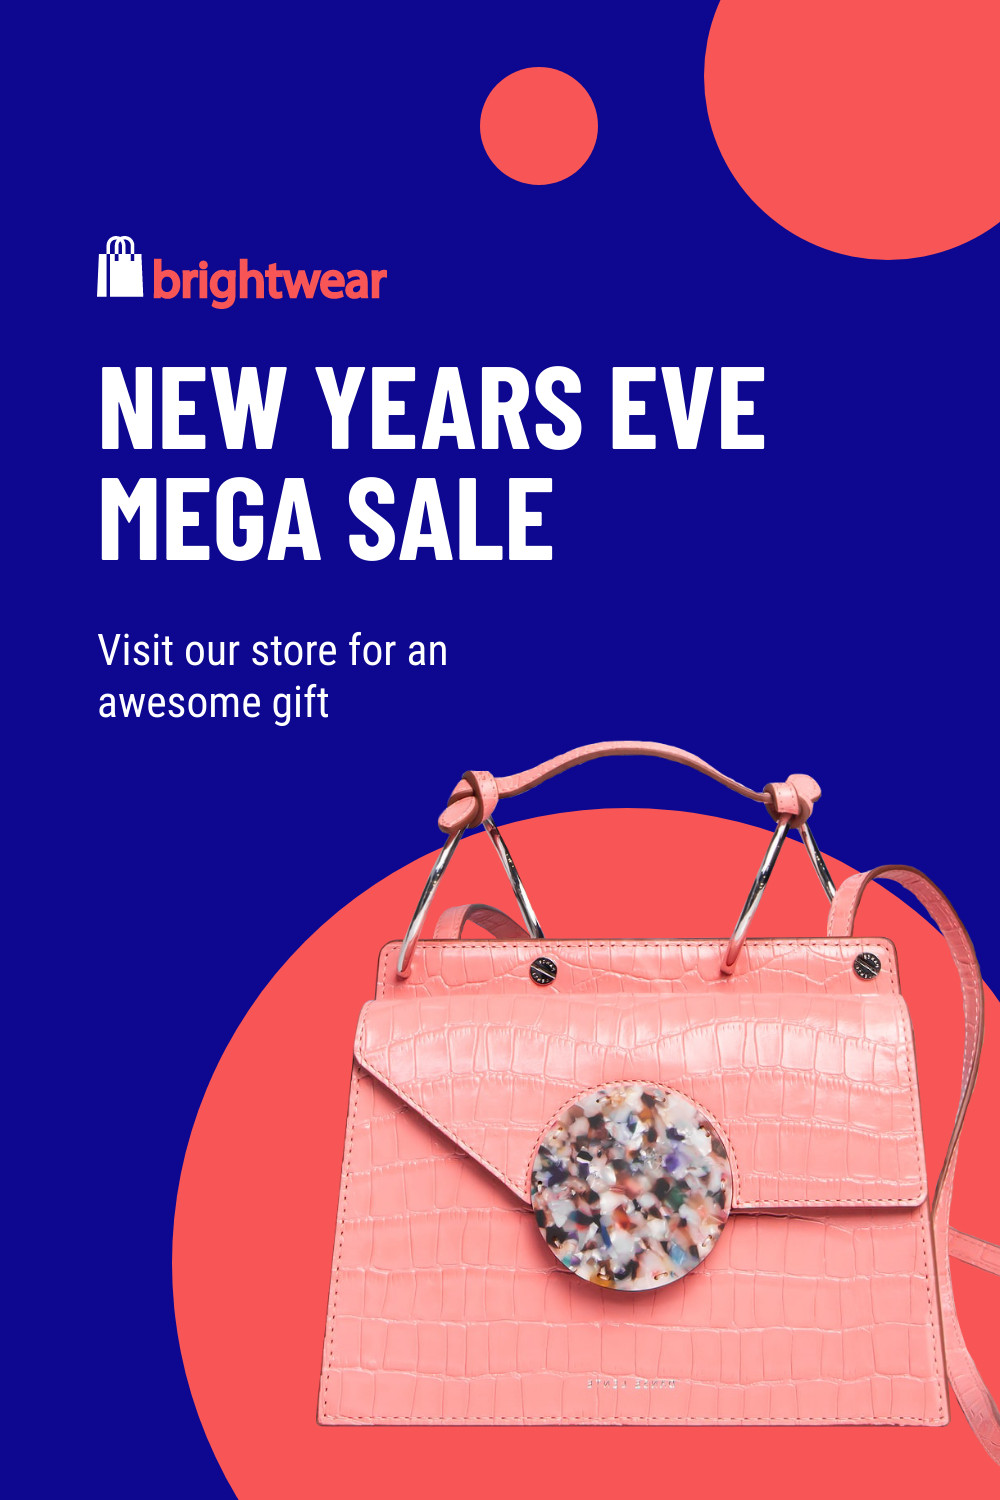 New Year Mega Sale with Awesome Gift Inline Rectangle 300x250